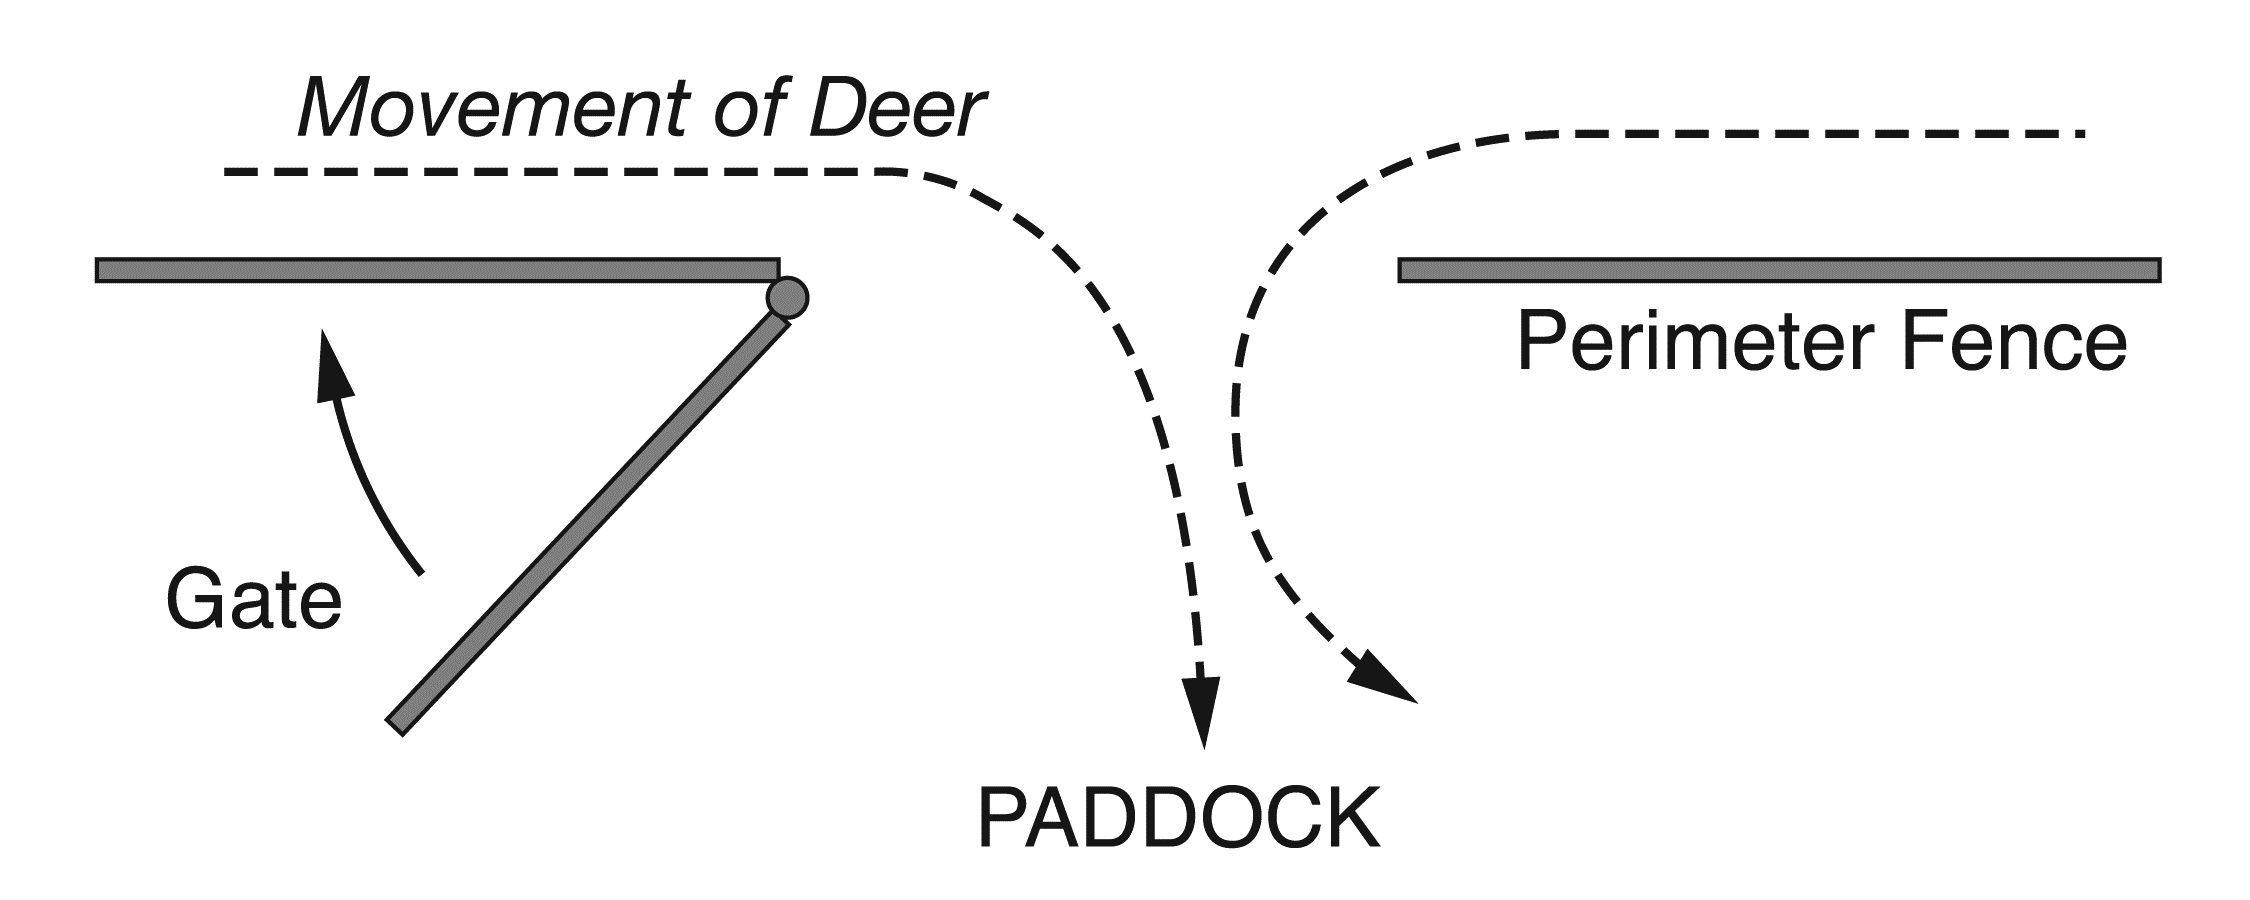 A picture of a grate swung inwards as much as possible to allow deer to enter easily into the paddock.